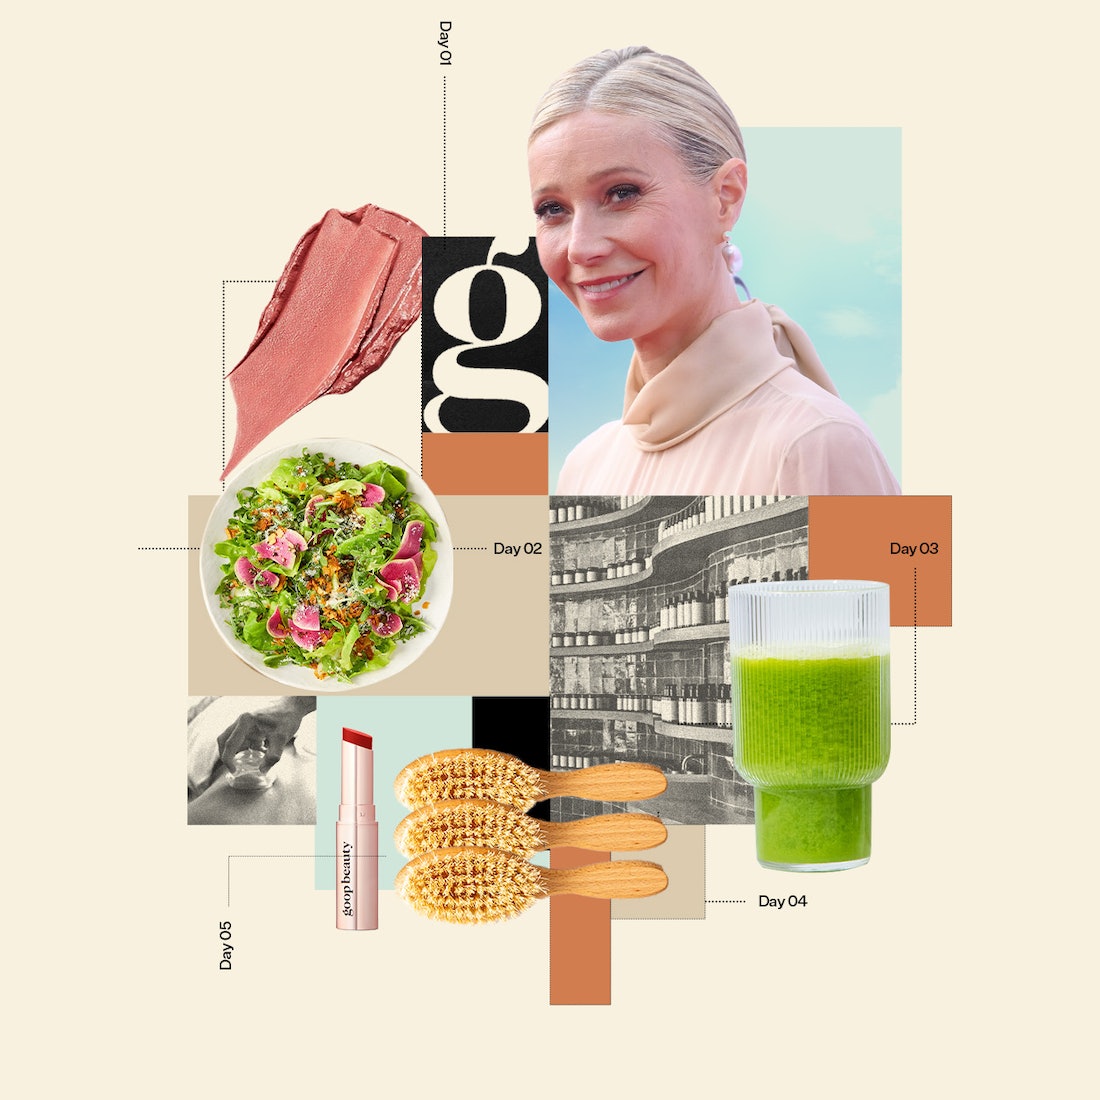 I spent a week doing Gwyneth Paltrow's routine, from oil pulling to contrast therapy.